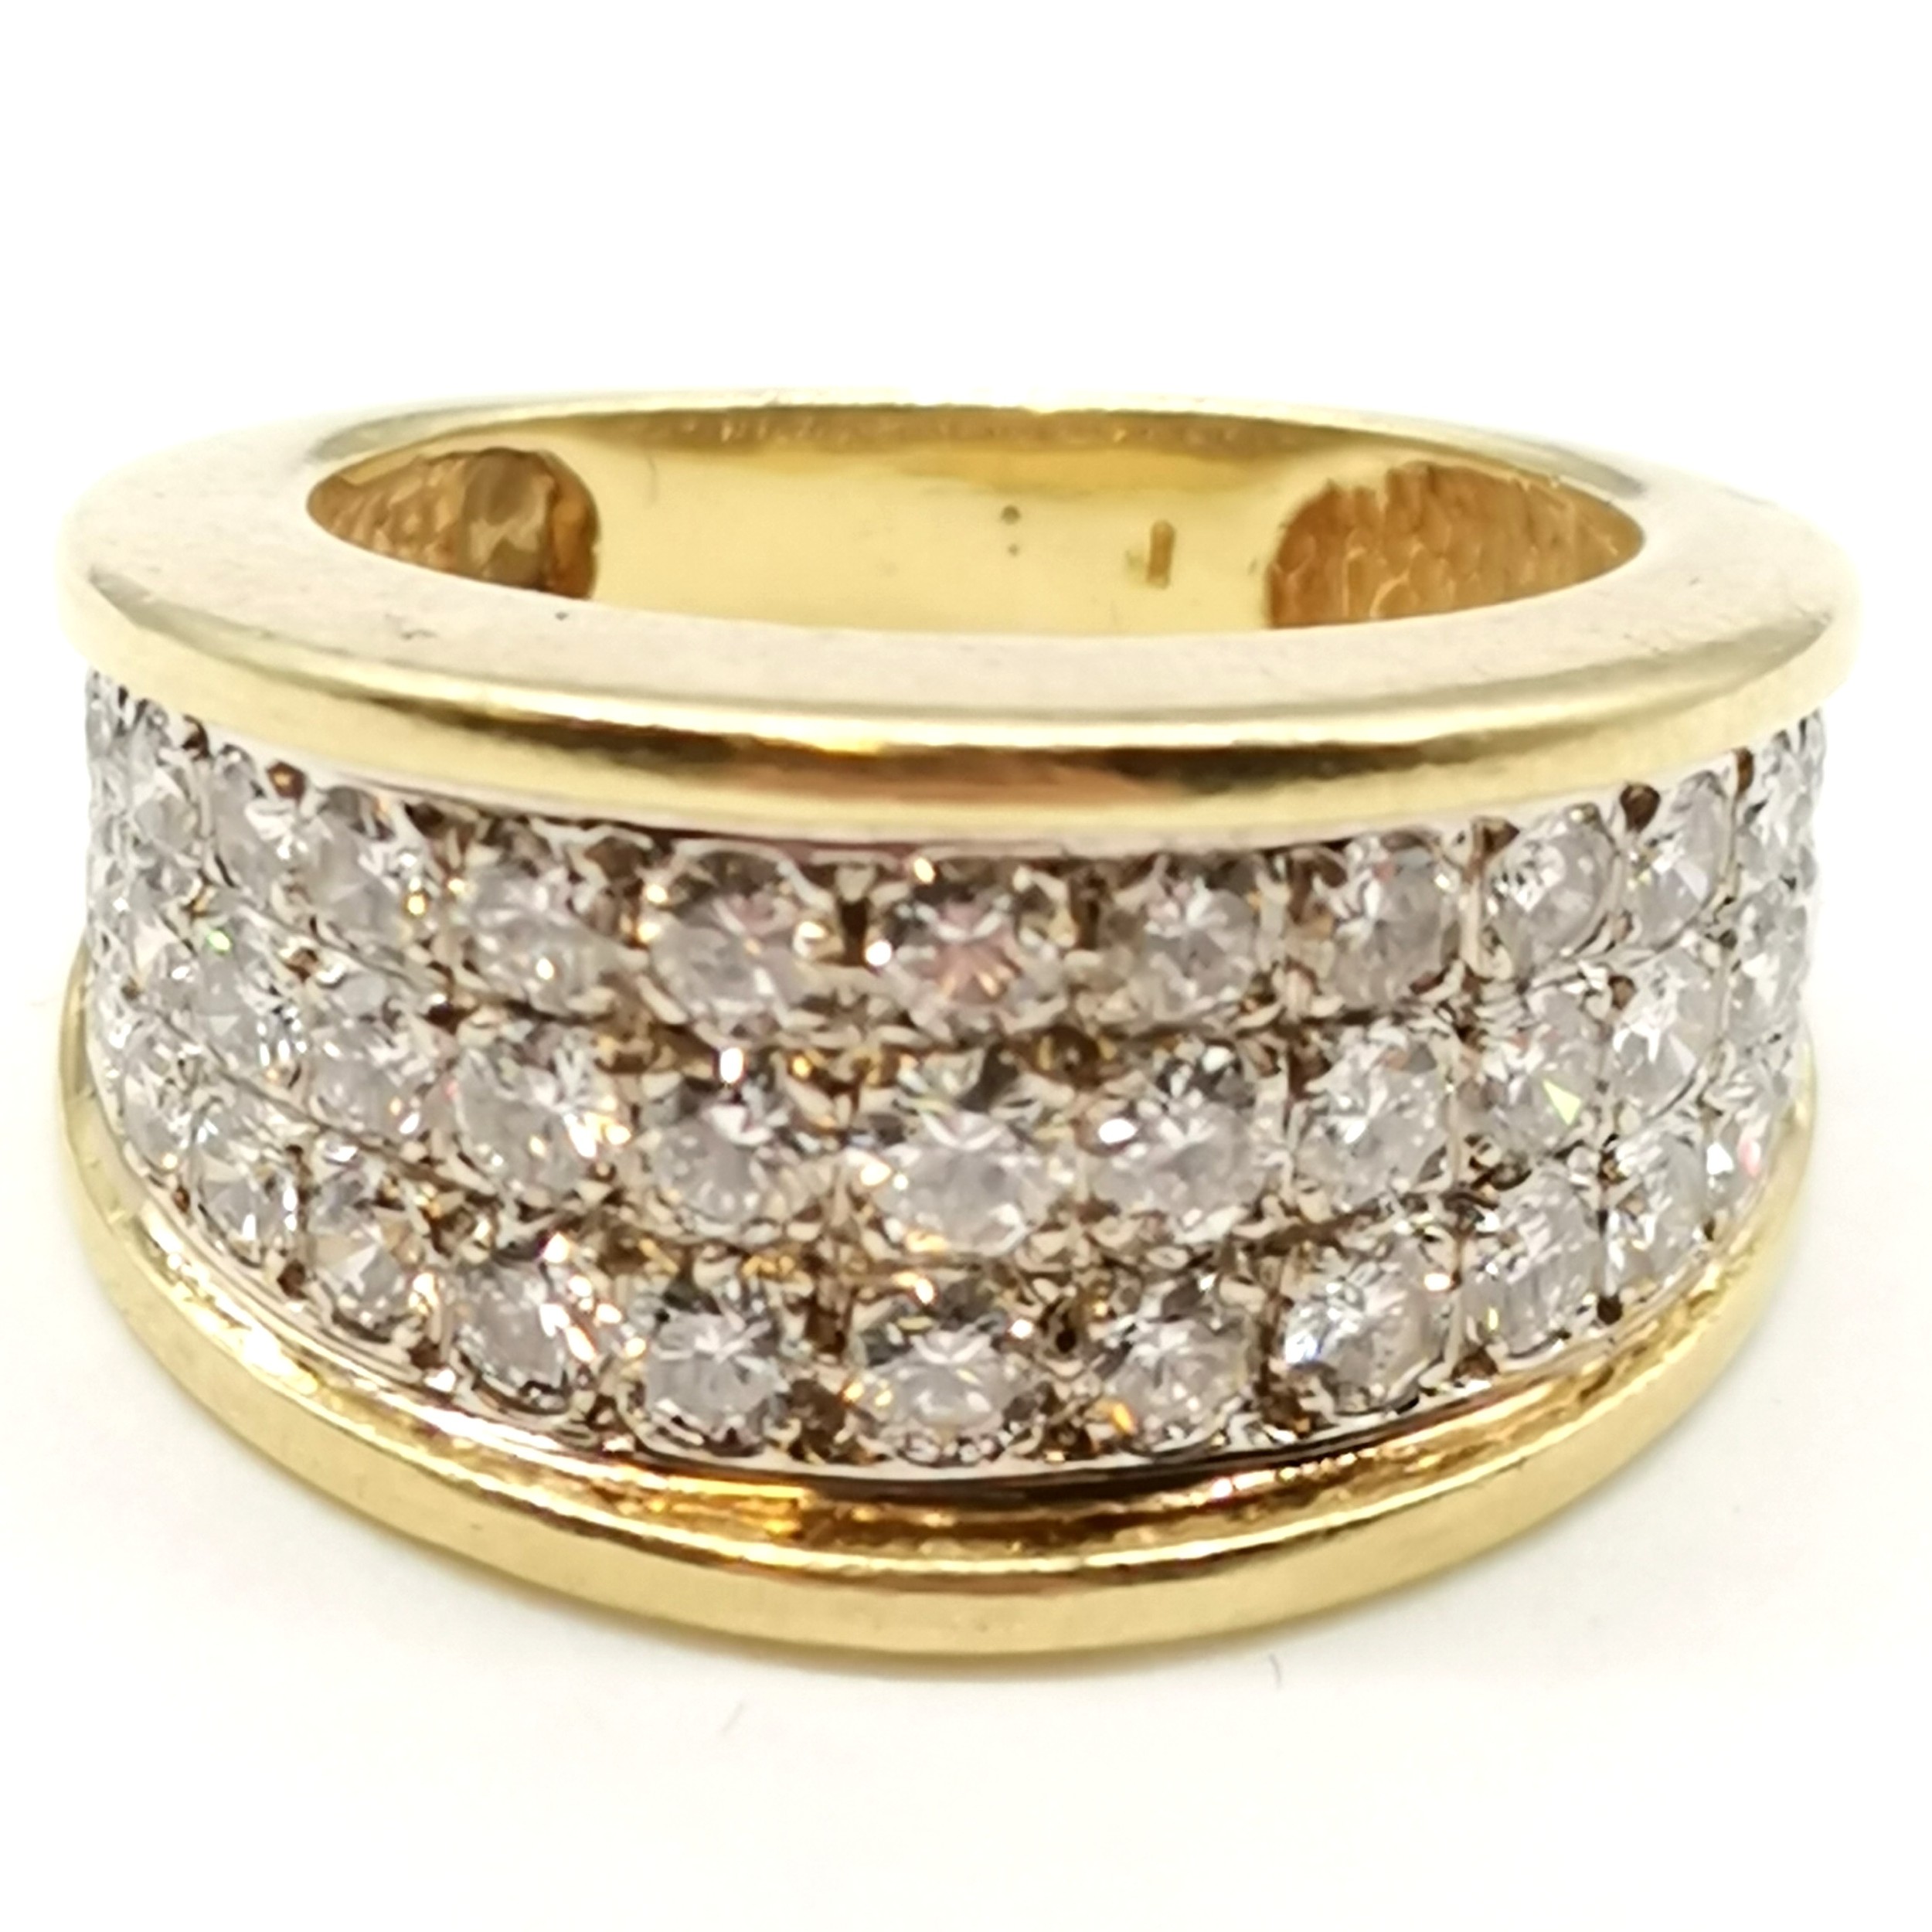 Impressive 18ct gold (unmarked) ring set with 47 diamonds in 3 rows - size L & 10.4g total weight